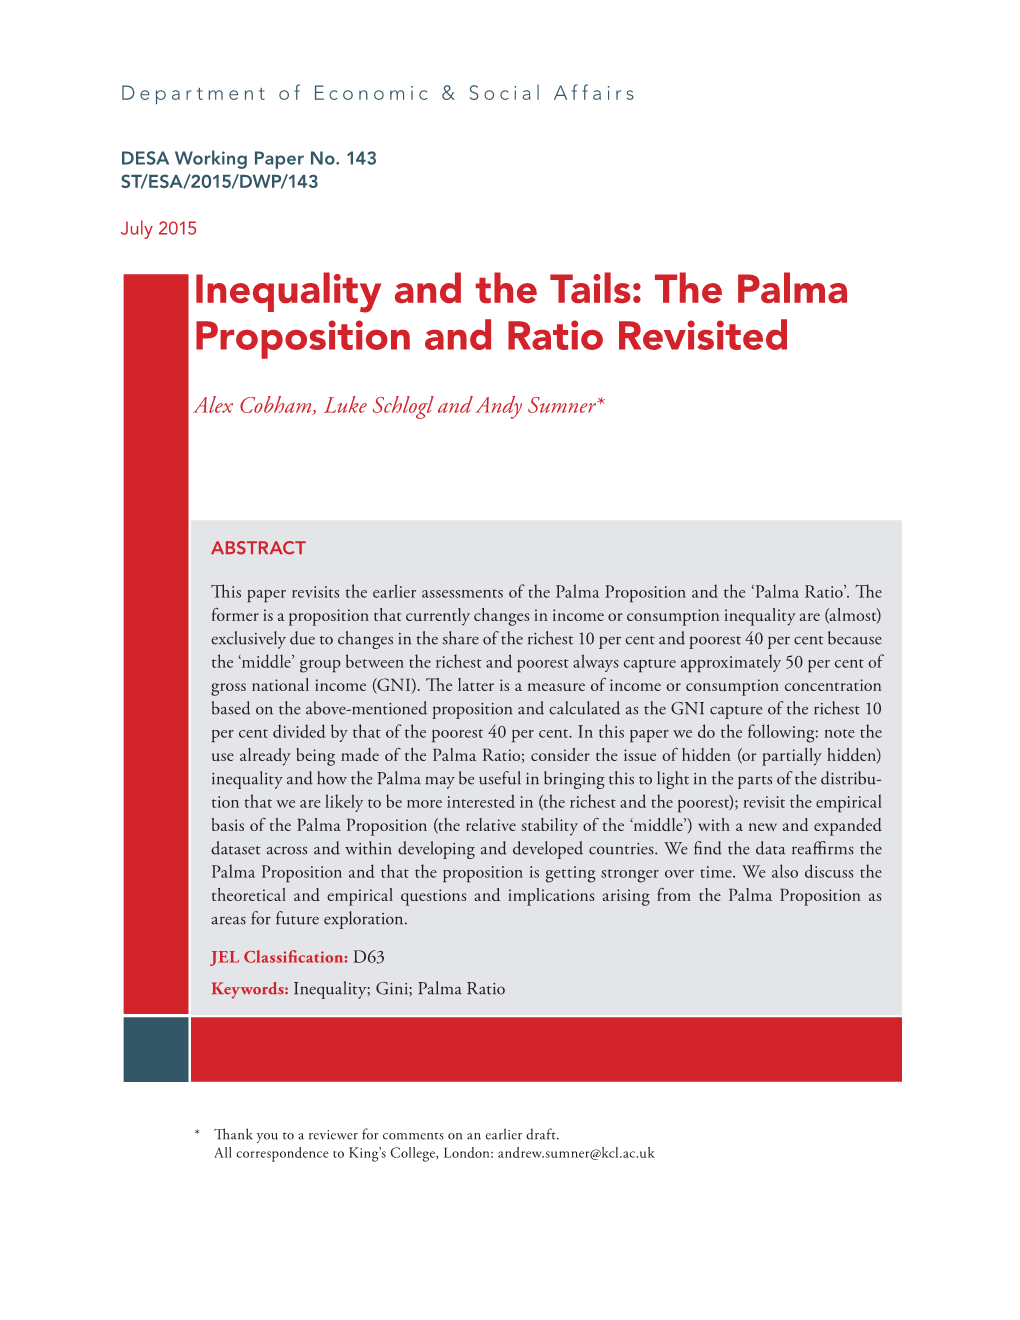 Inequality and the Tails: the Palma Proposition and Ratio Revisited